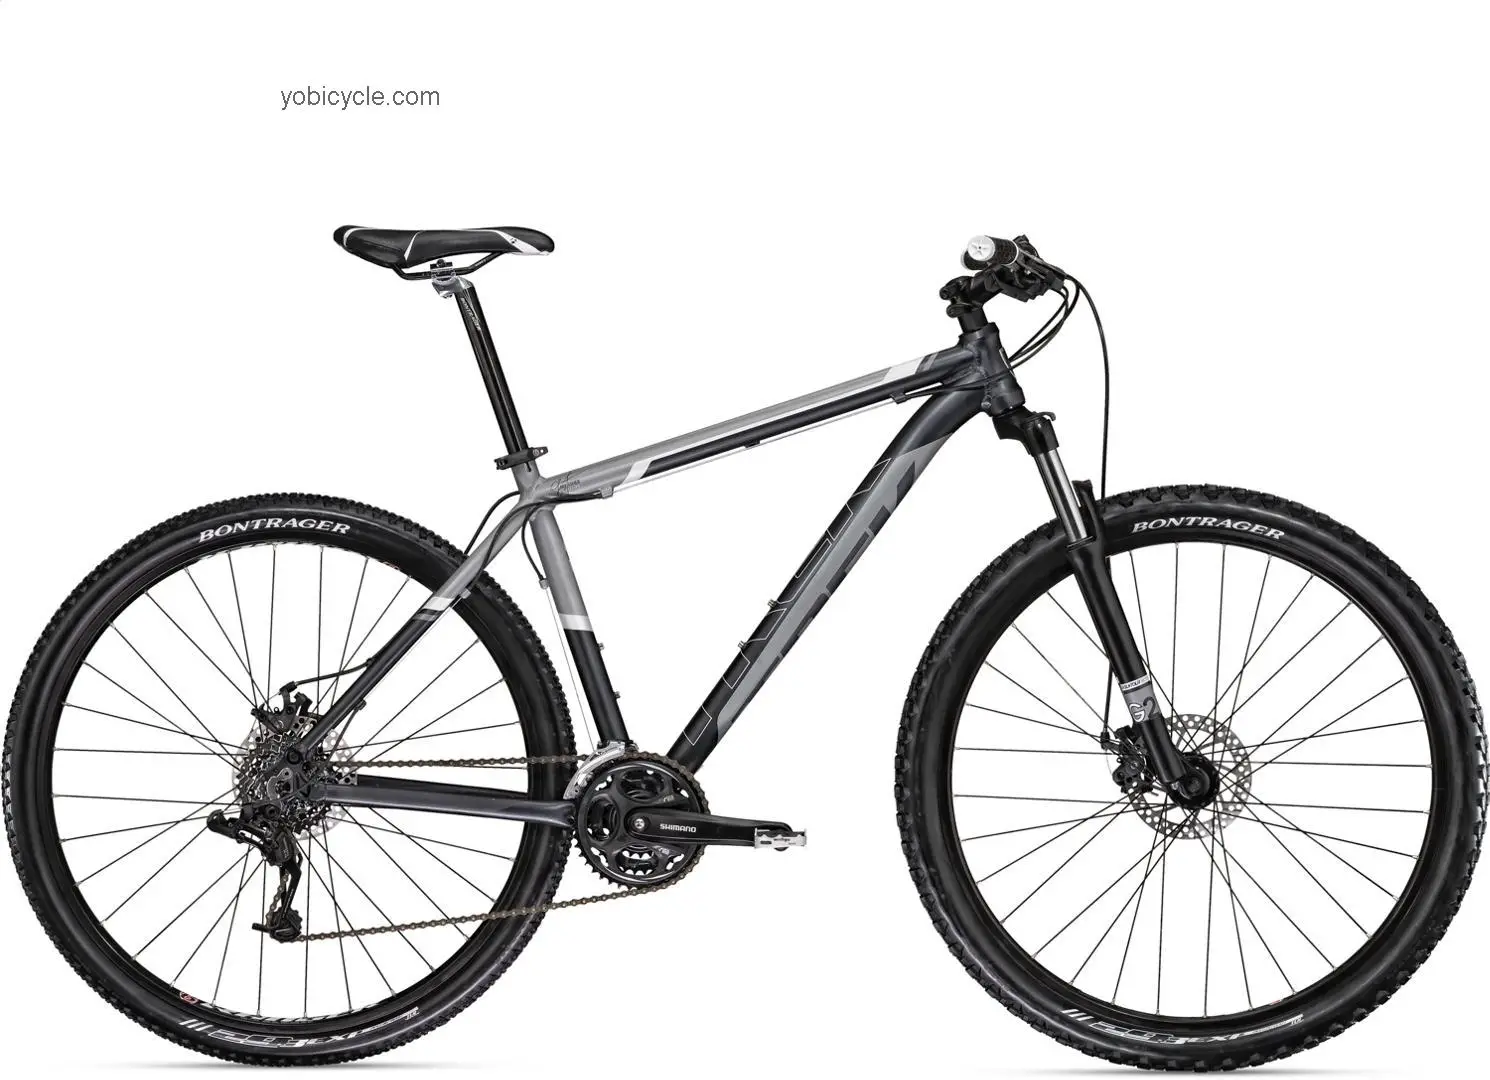 Trek Gary Fisher Marlin 2011 comparison online with competitors